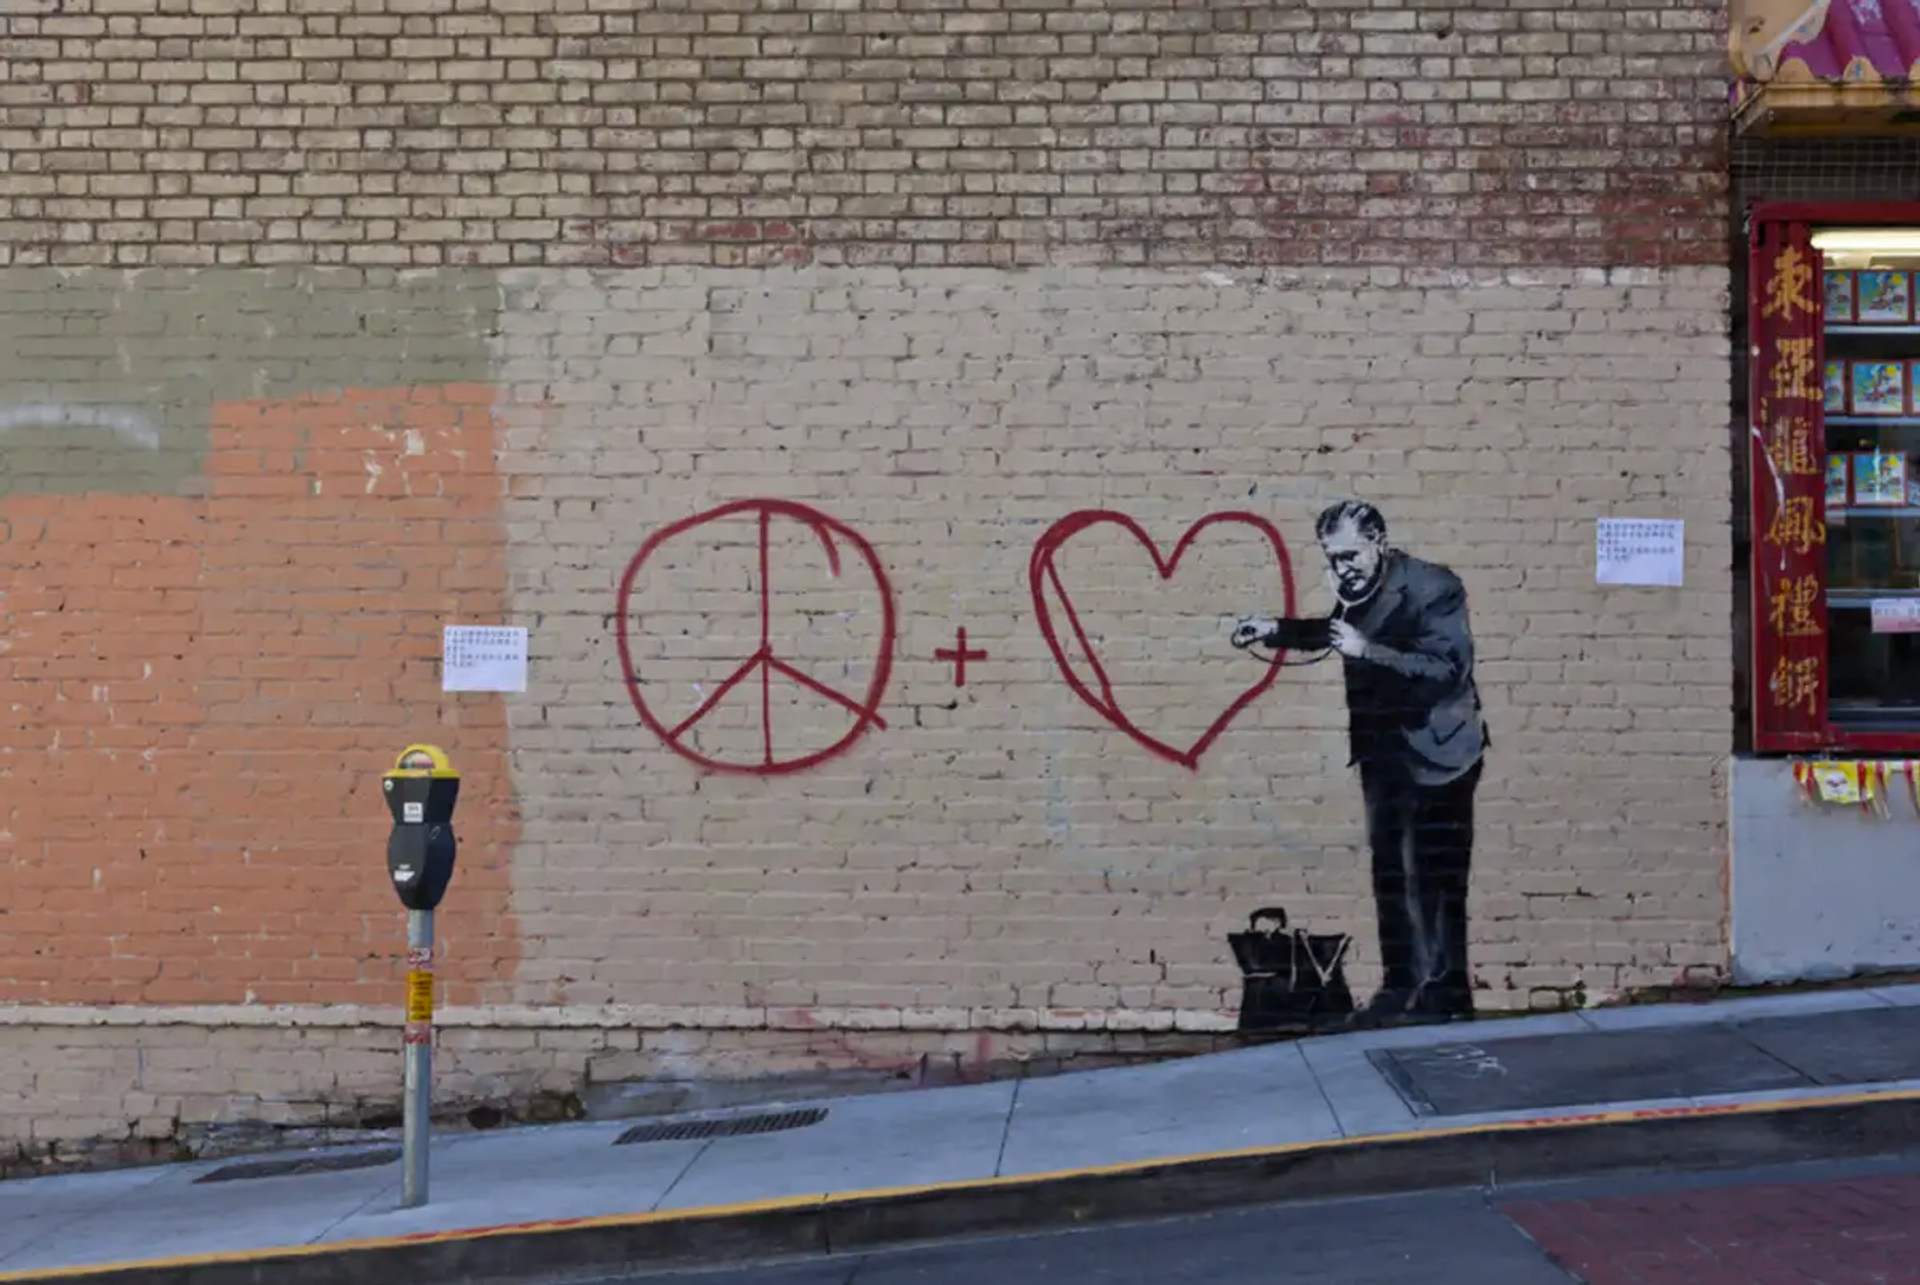 An image of the mural Peaceful Doctor by Banksy. It shows a monochrome man, in doctor's gear, listening to the heartbreak of a simplified peace + love graffiti.